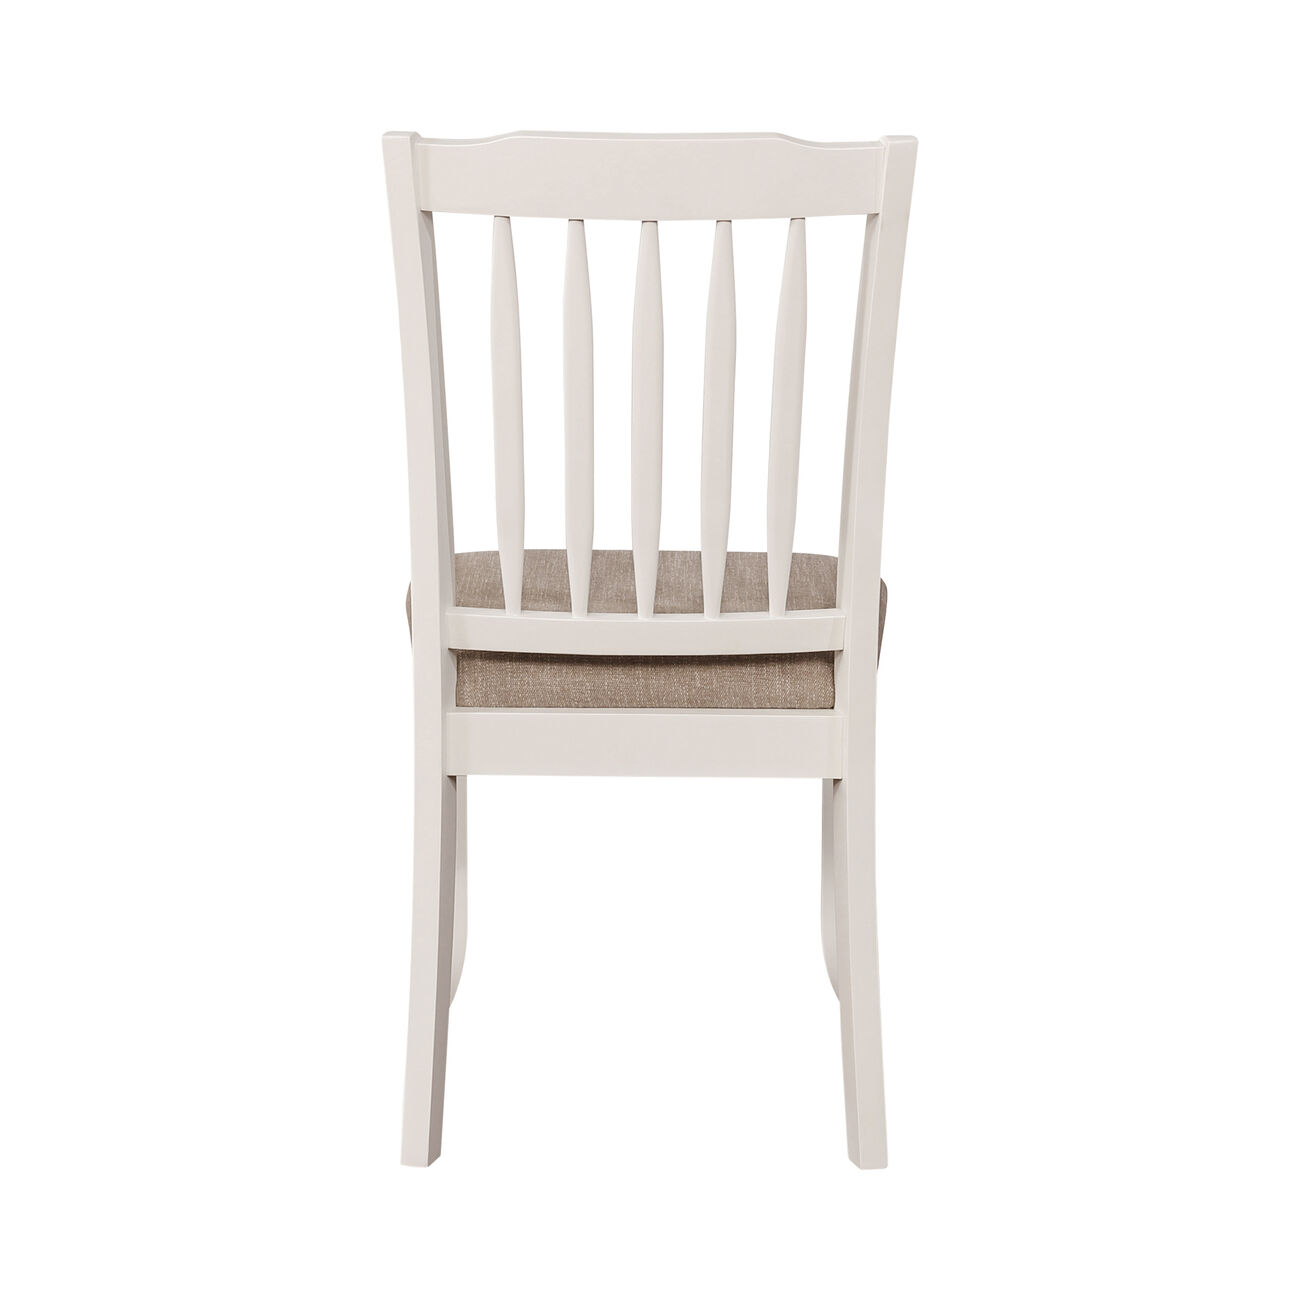 Slatted Wooden Dining Chair with Padded Seat, Set of 2, White and Beige